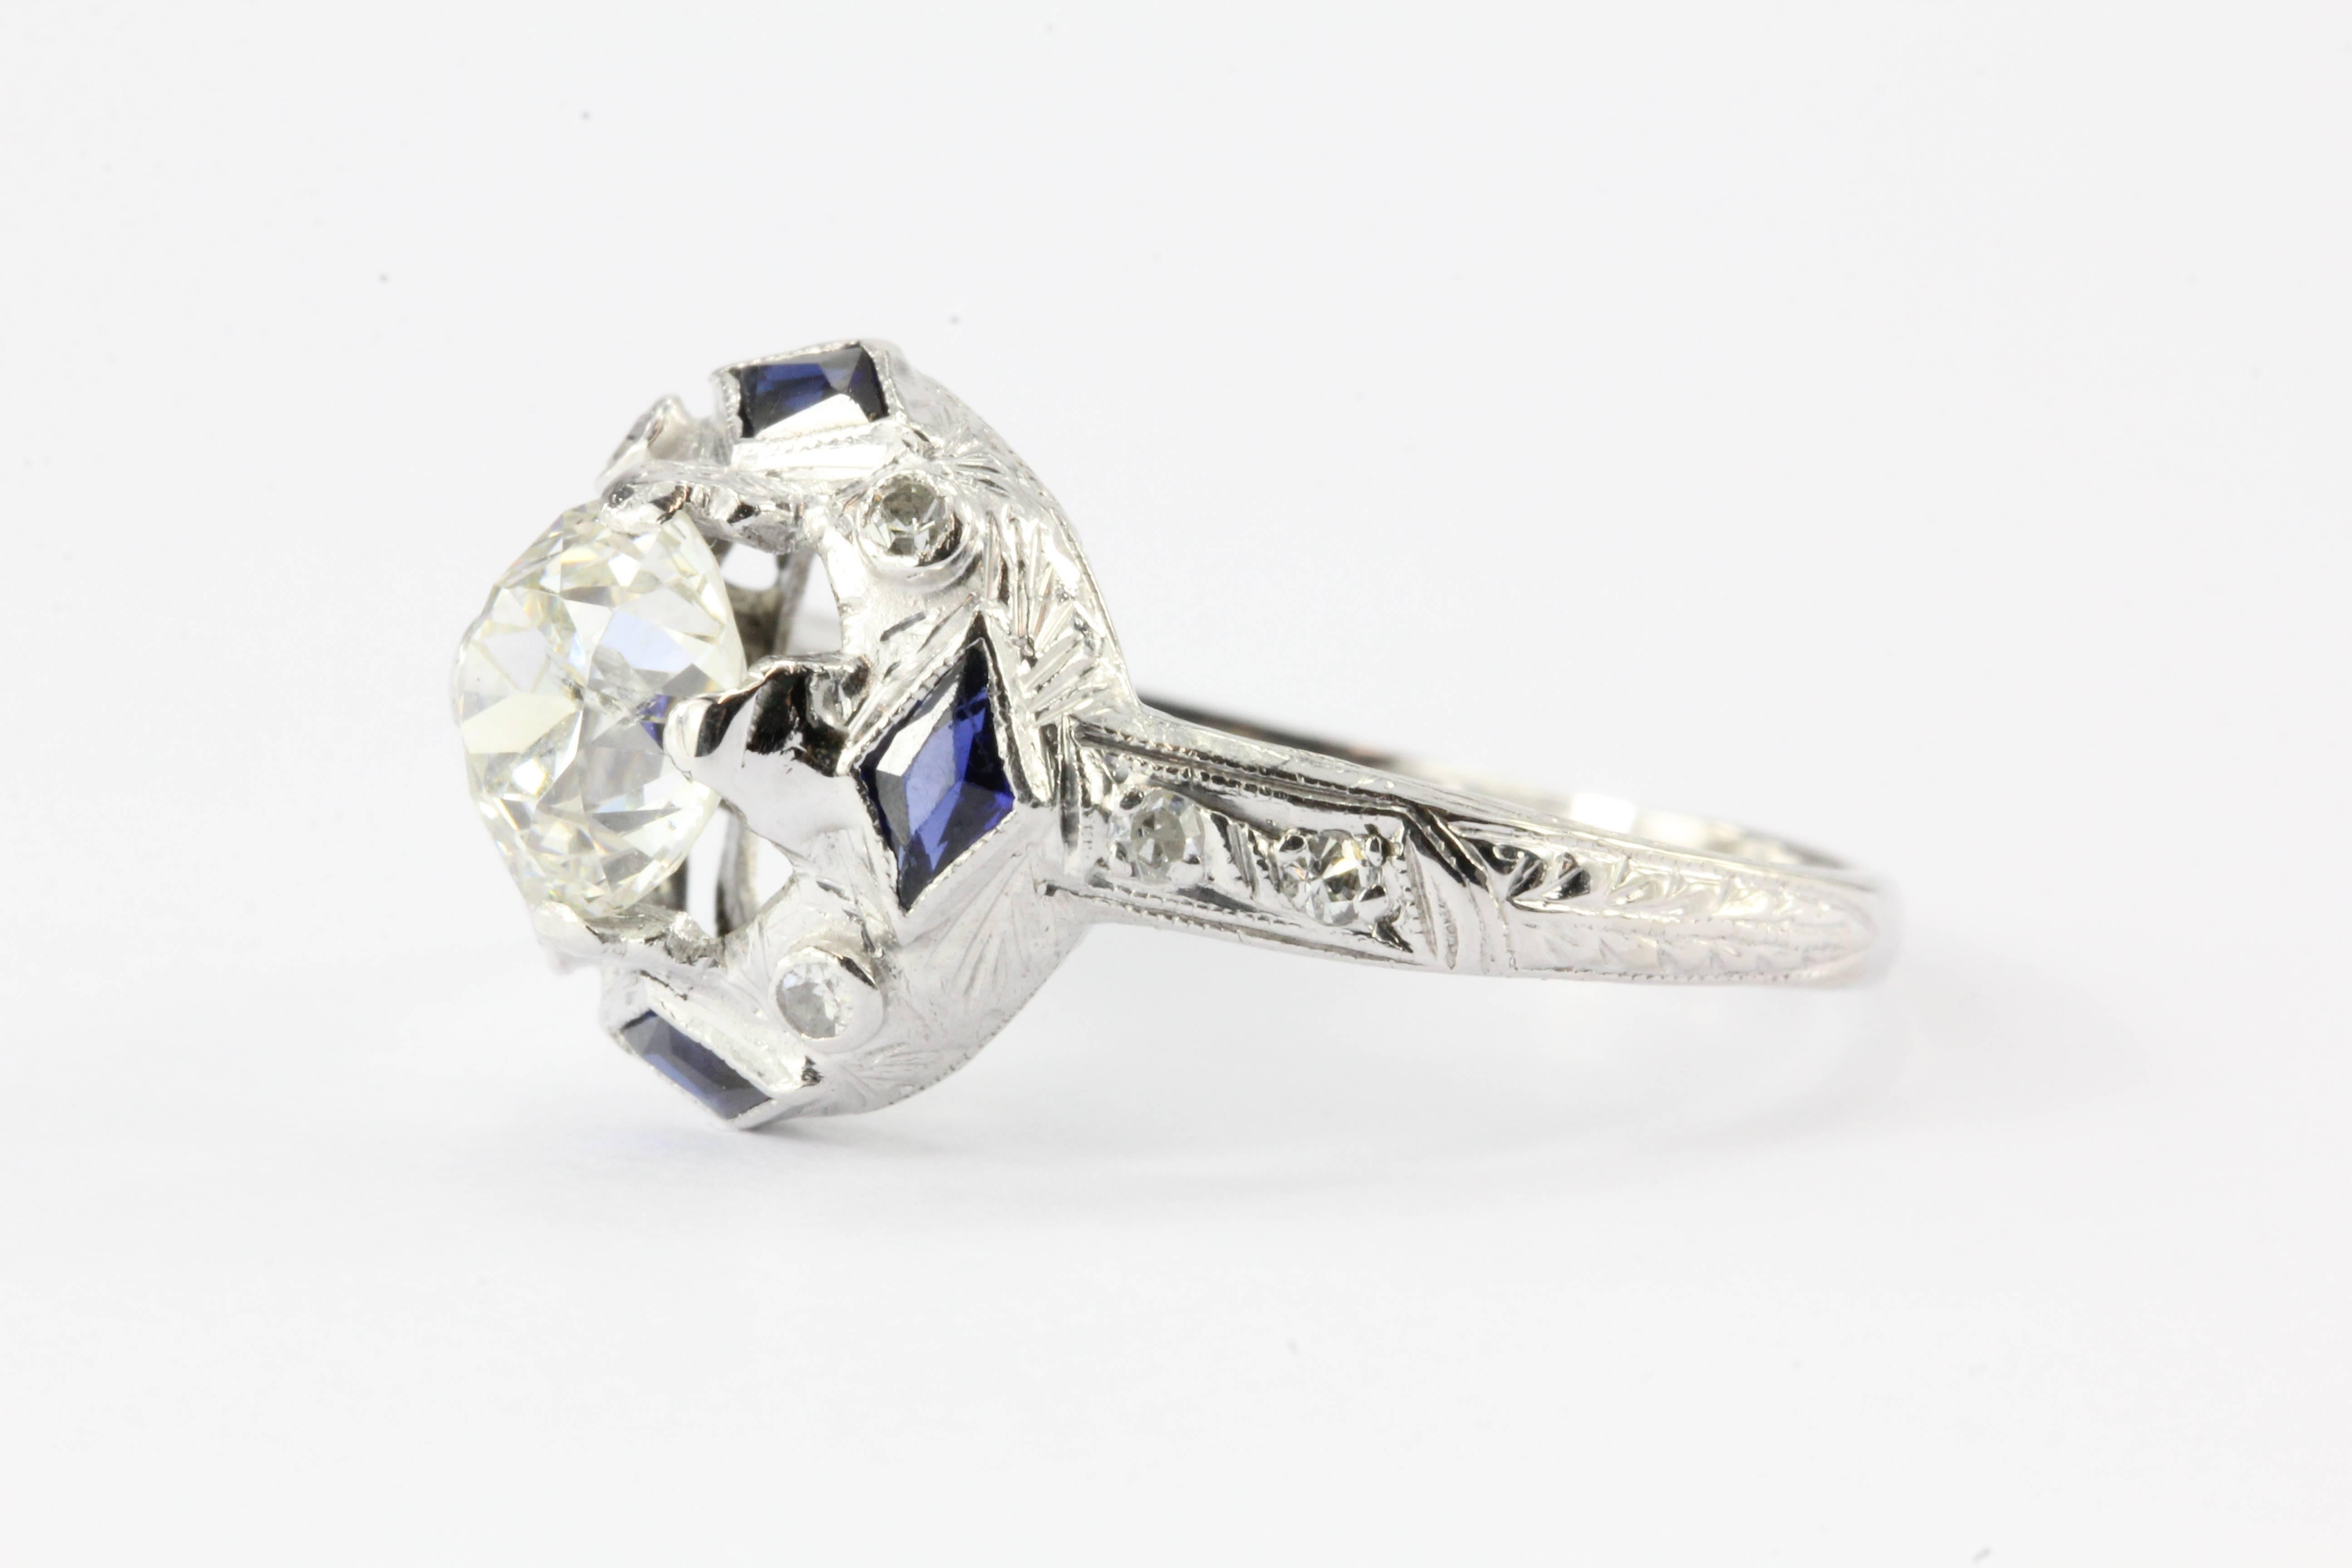 Art Deco Platinum Sapphire 1.27 Carat Old European Diamond Engagement Ring c.1925

This magnificent and grand survivor of the roaring 20's comes with all the bells and whistles one could desire in an authentic art deco engagement ring. The piece is